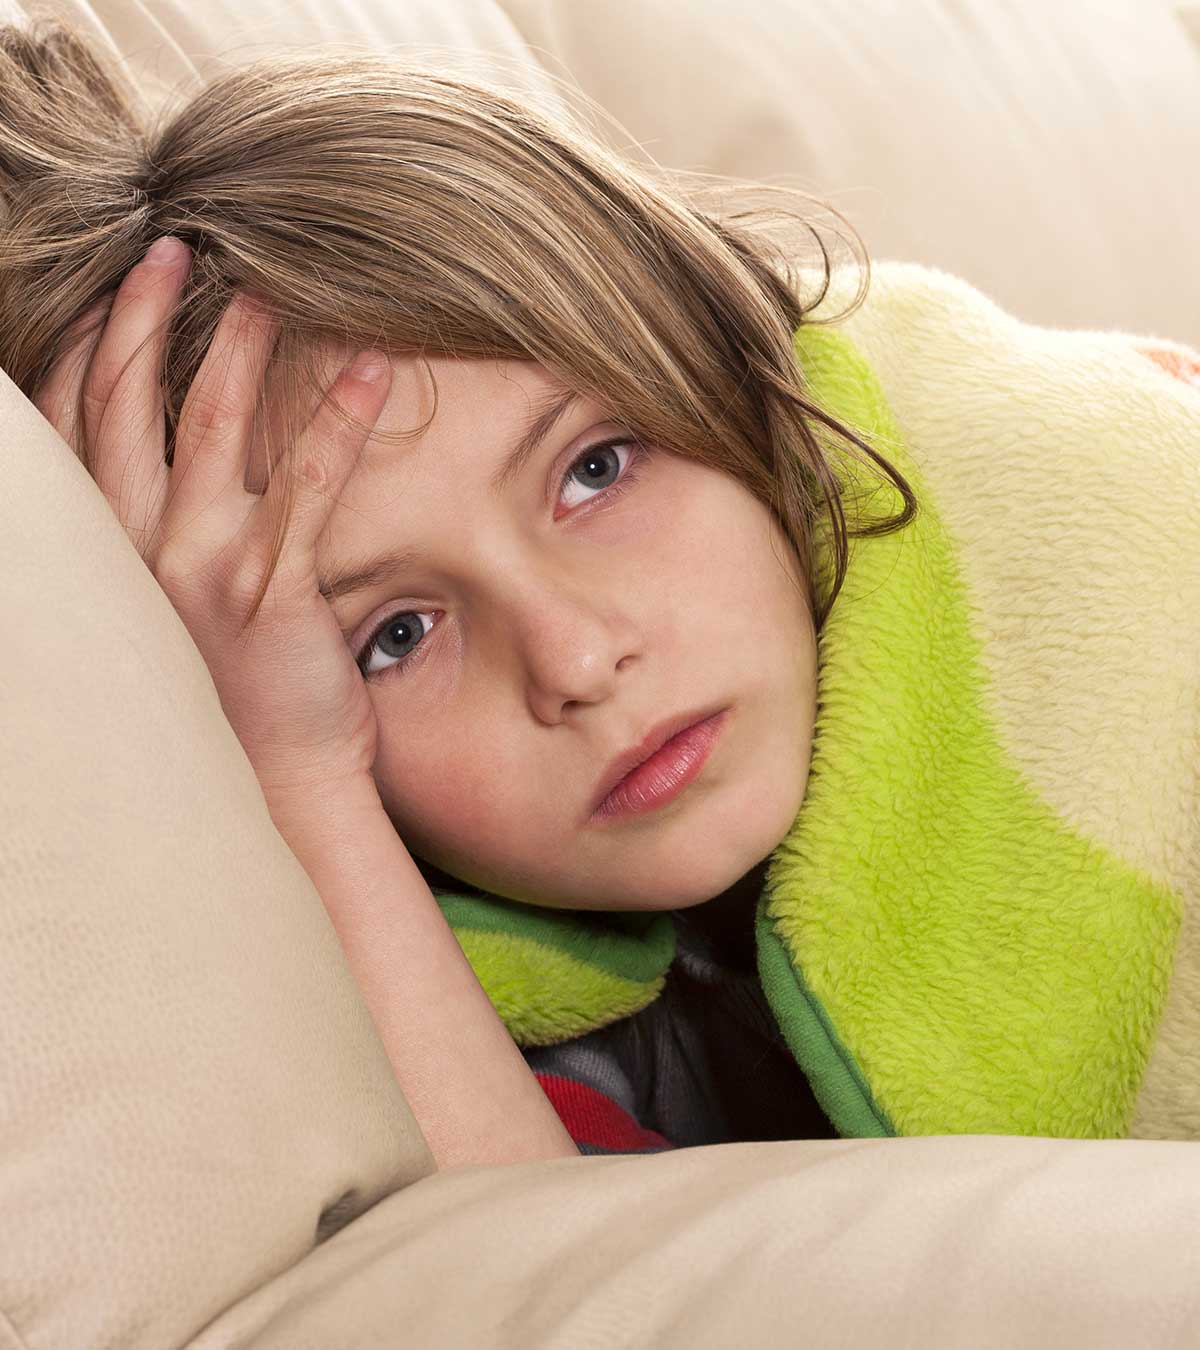 17 Causes Of Nausea In Children, Treatment And Home Remedies